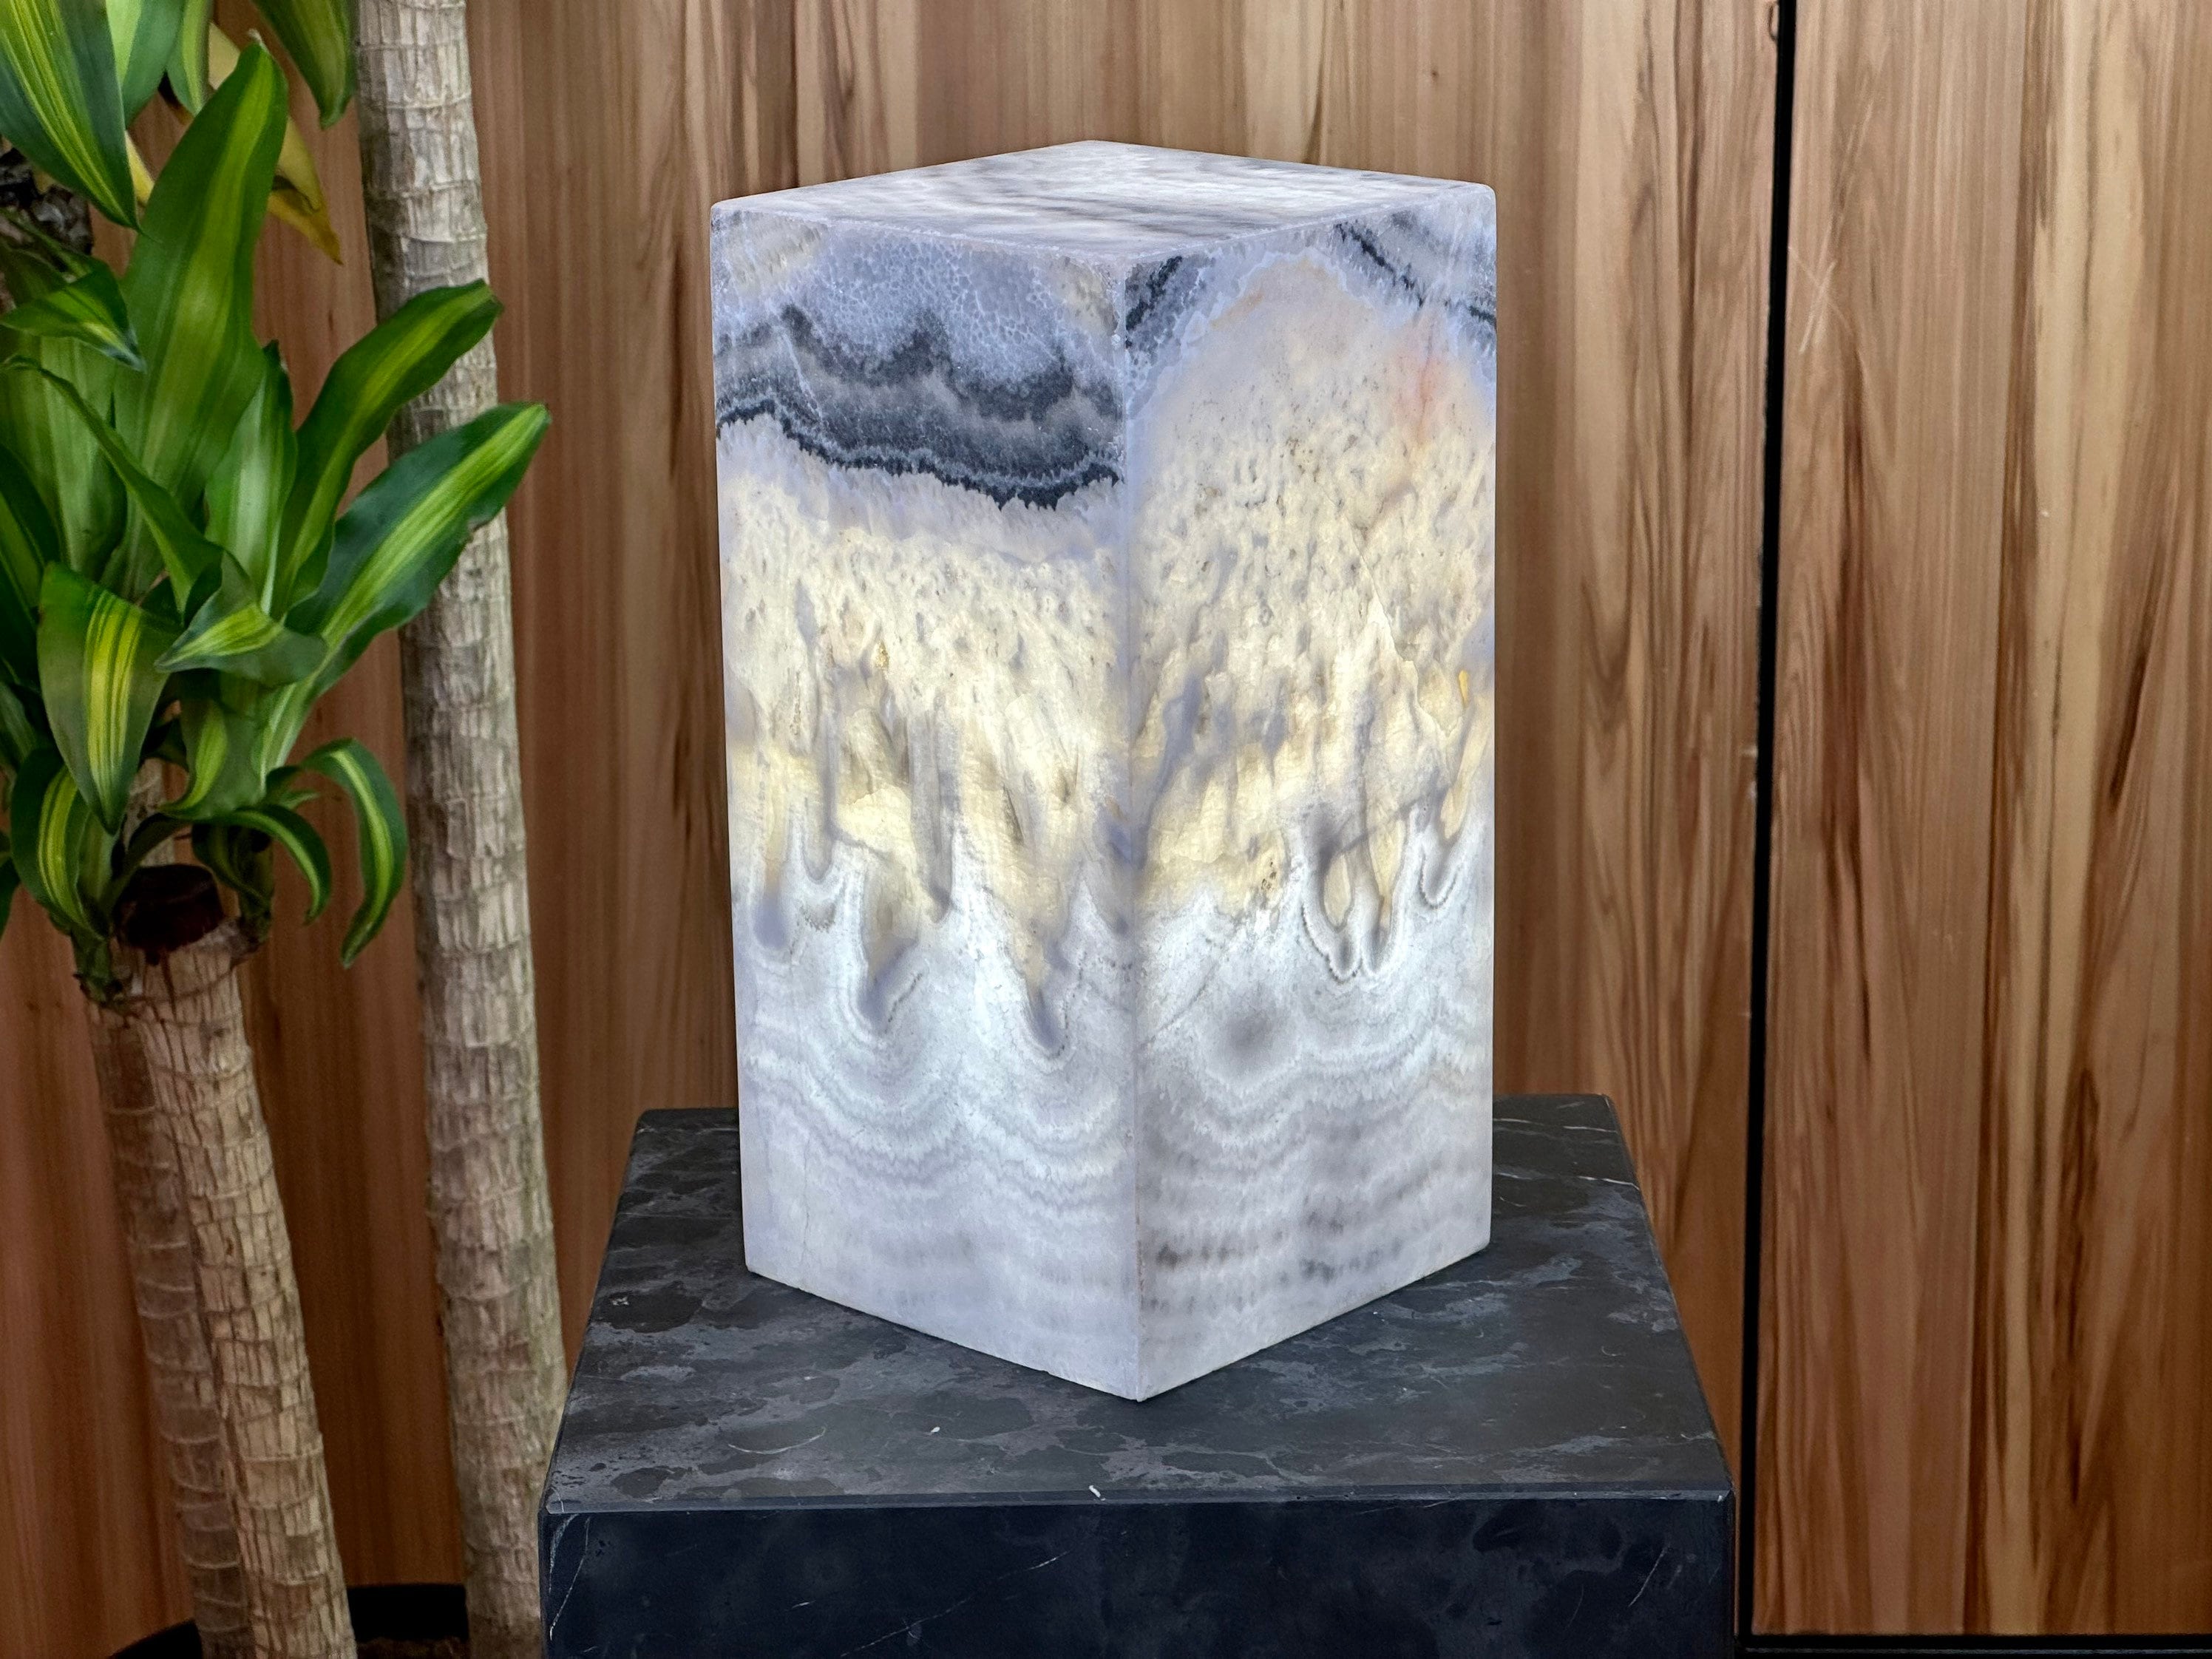 Gray Onyx Lamp - Lamp for Bedroom - Home & Decor - Bedside Lamp